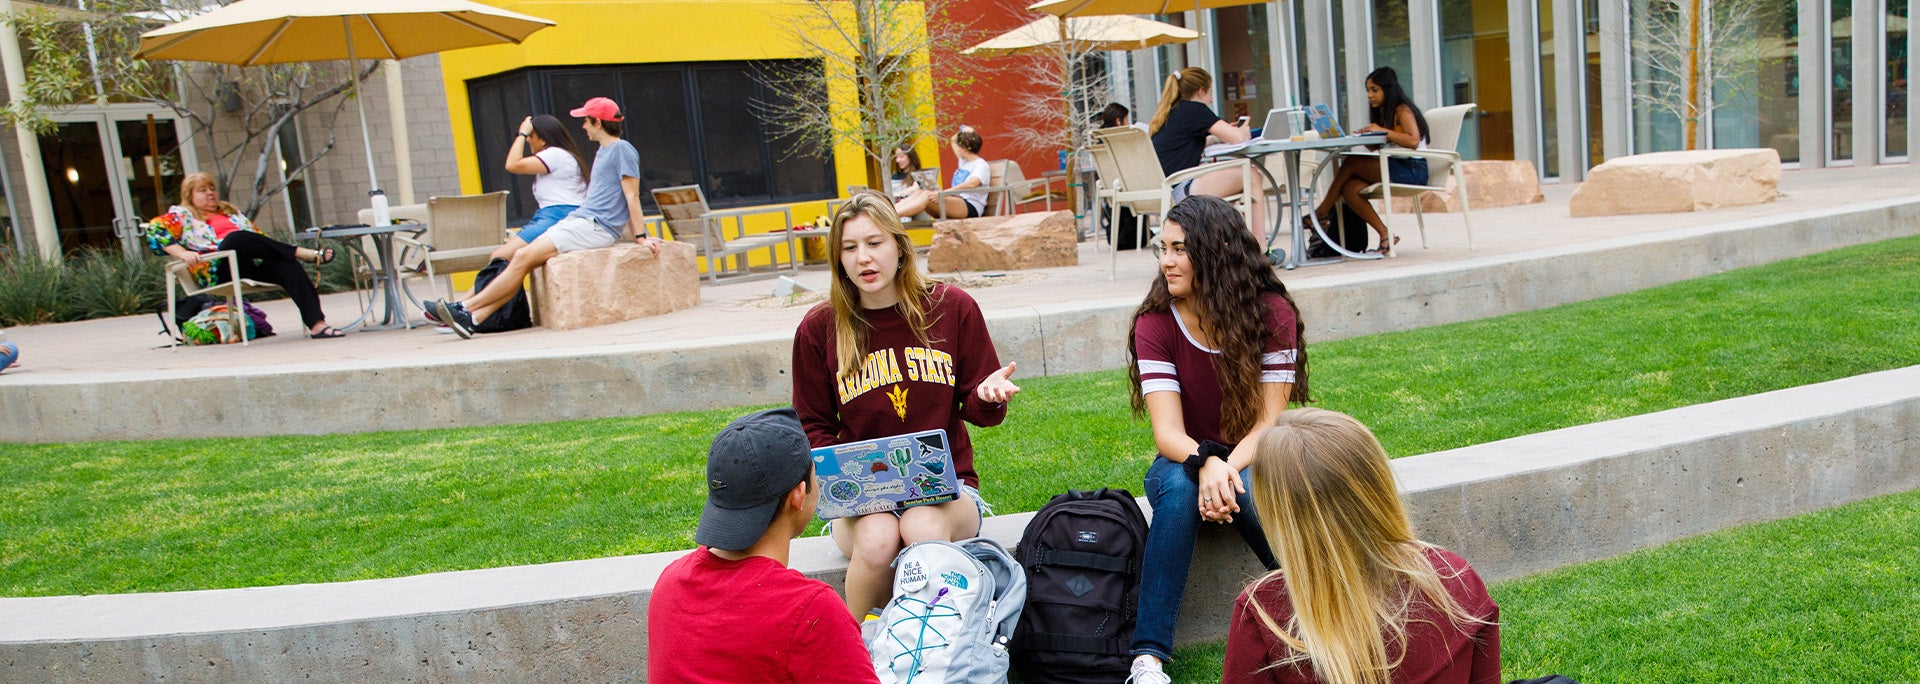 Four students gathered around the Barrett Tempe great court lawn having a conversation